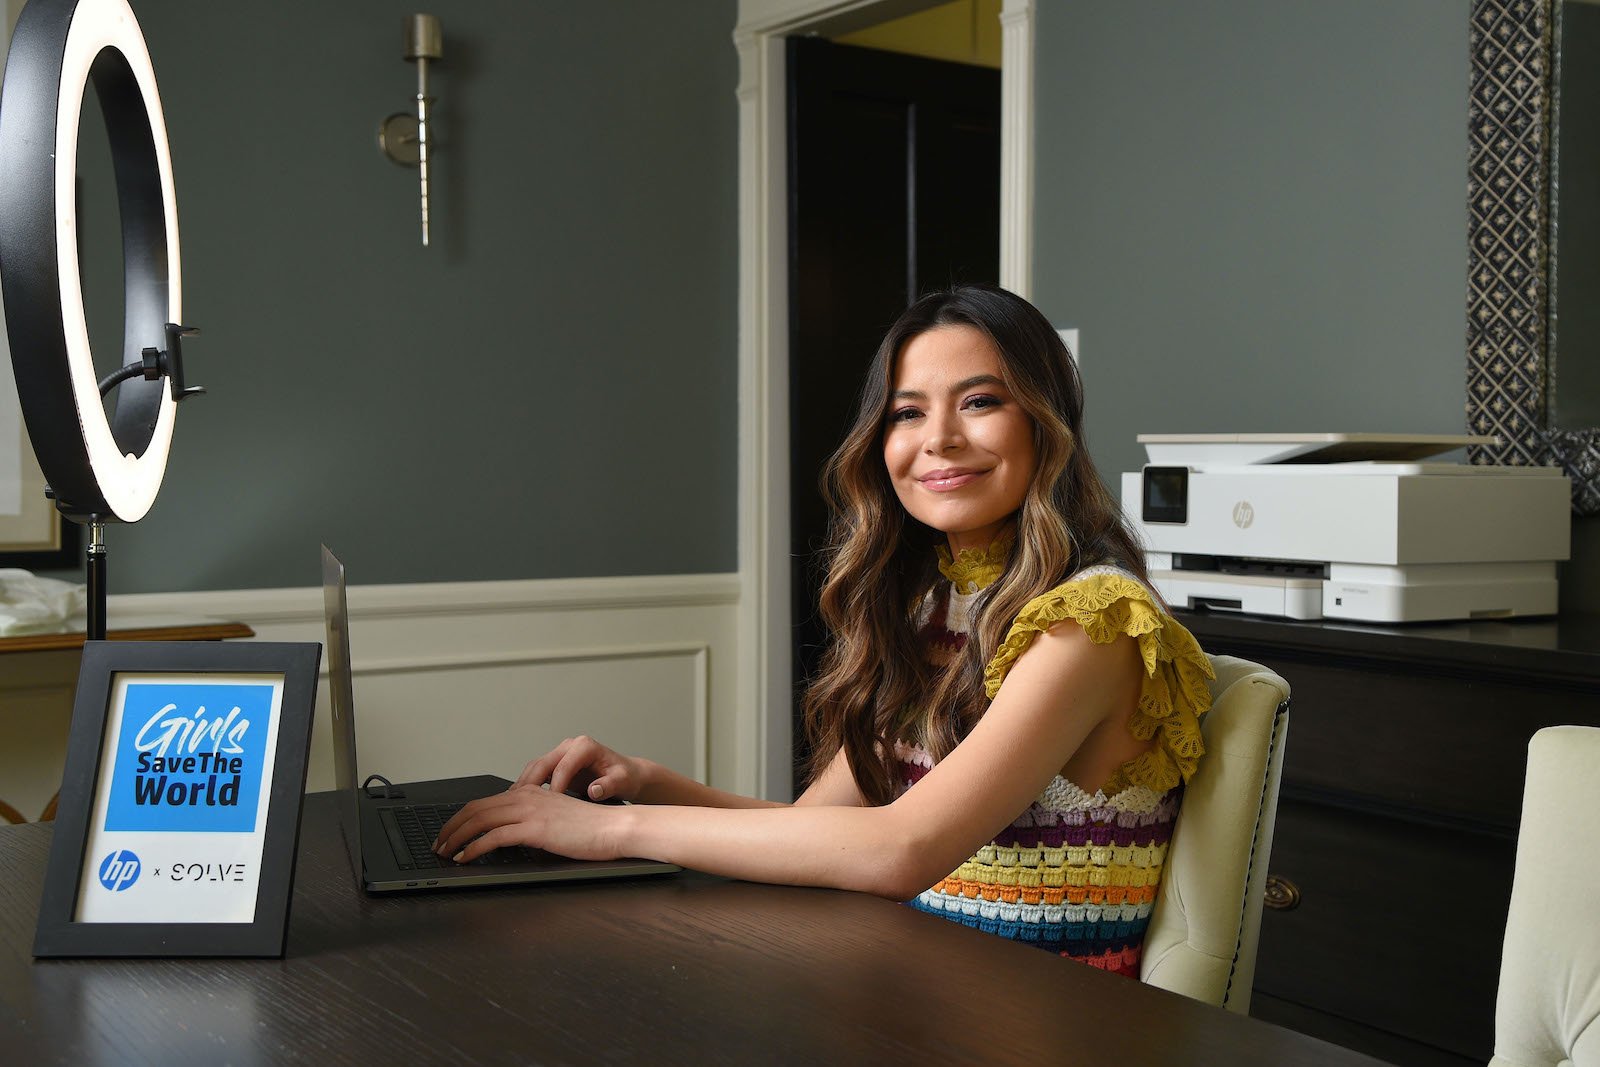 Miranda Cosgrove from iCarly rests up between interviews asking girls to take on climate change through HP’s Girls Save the World